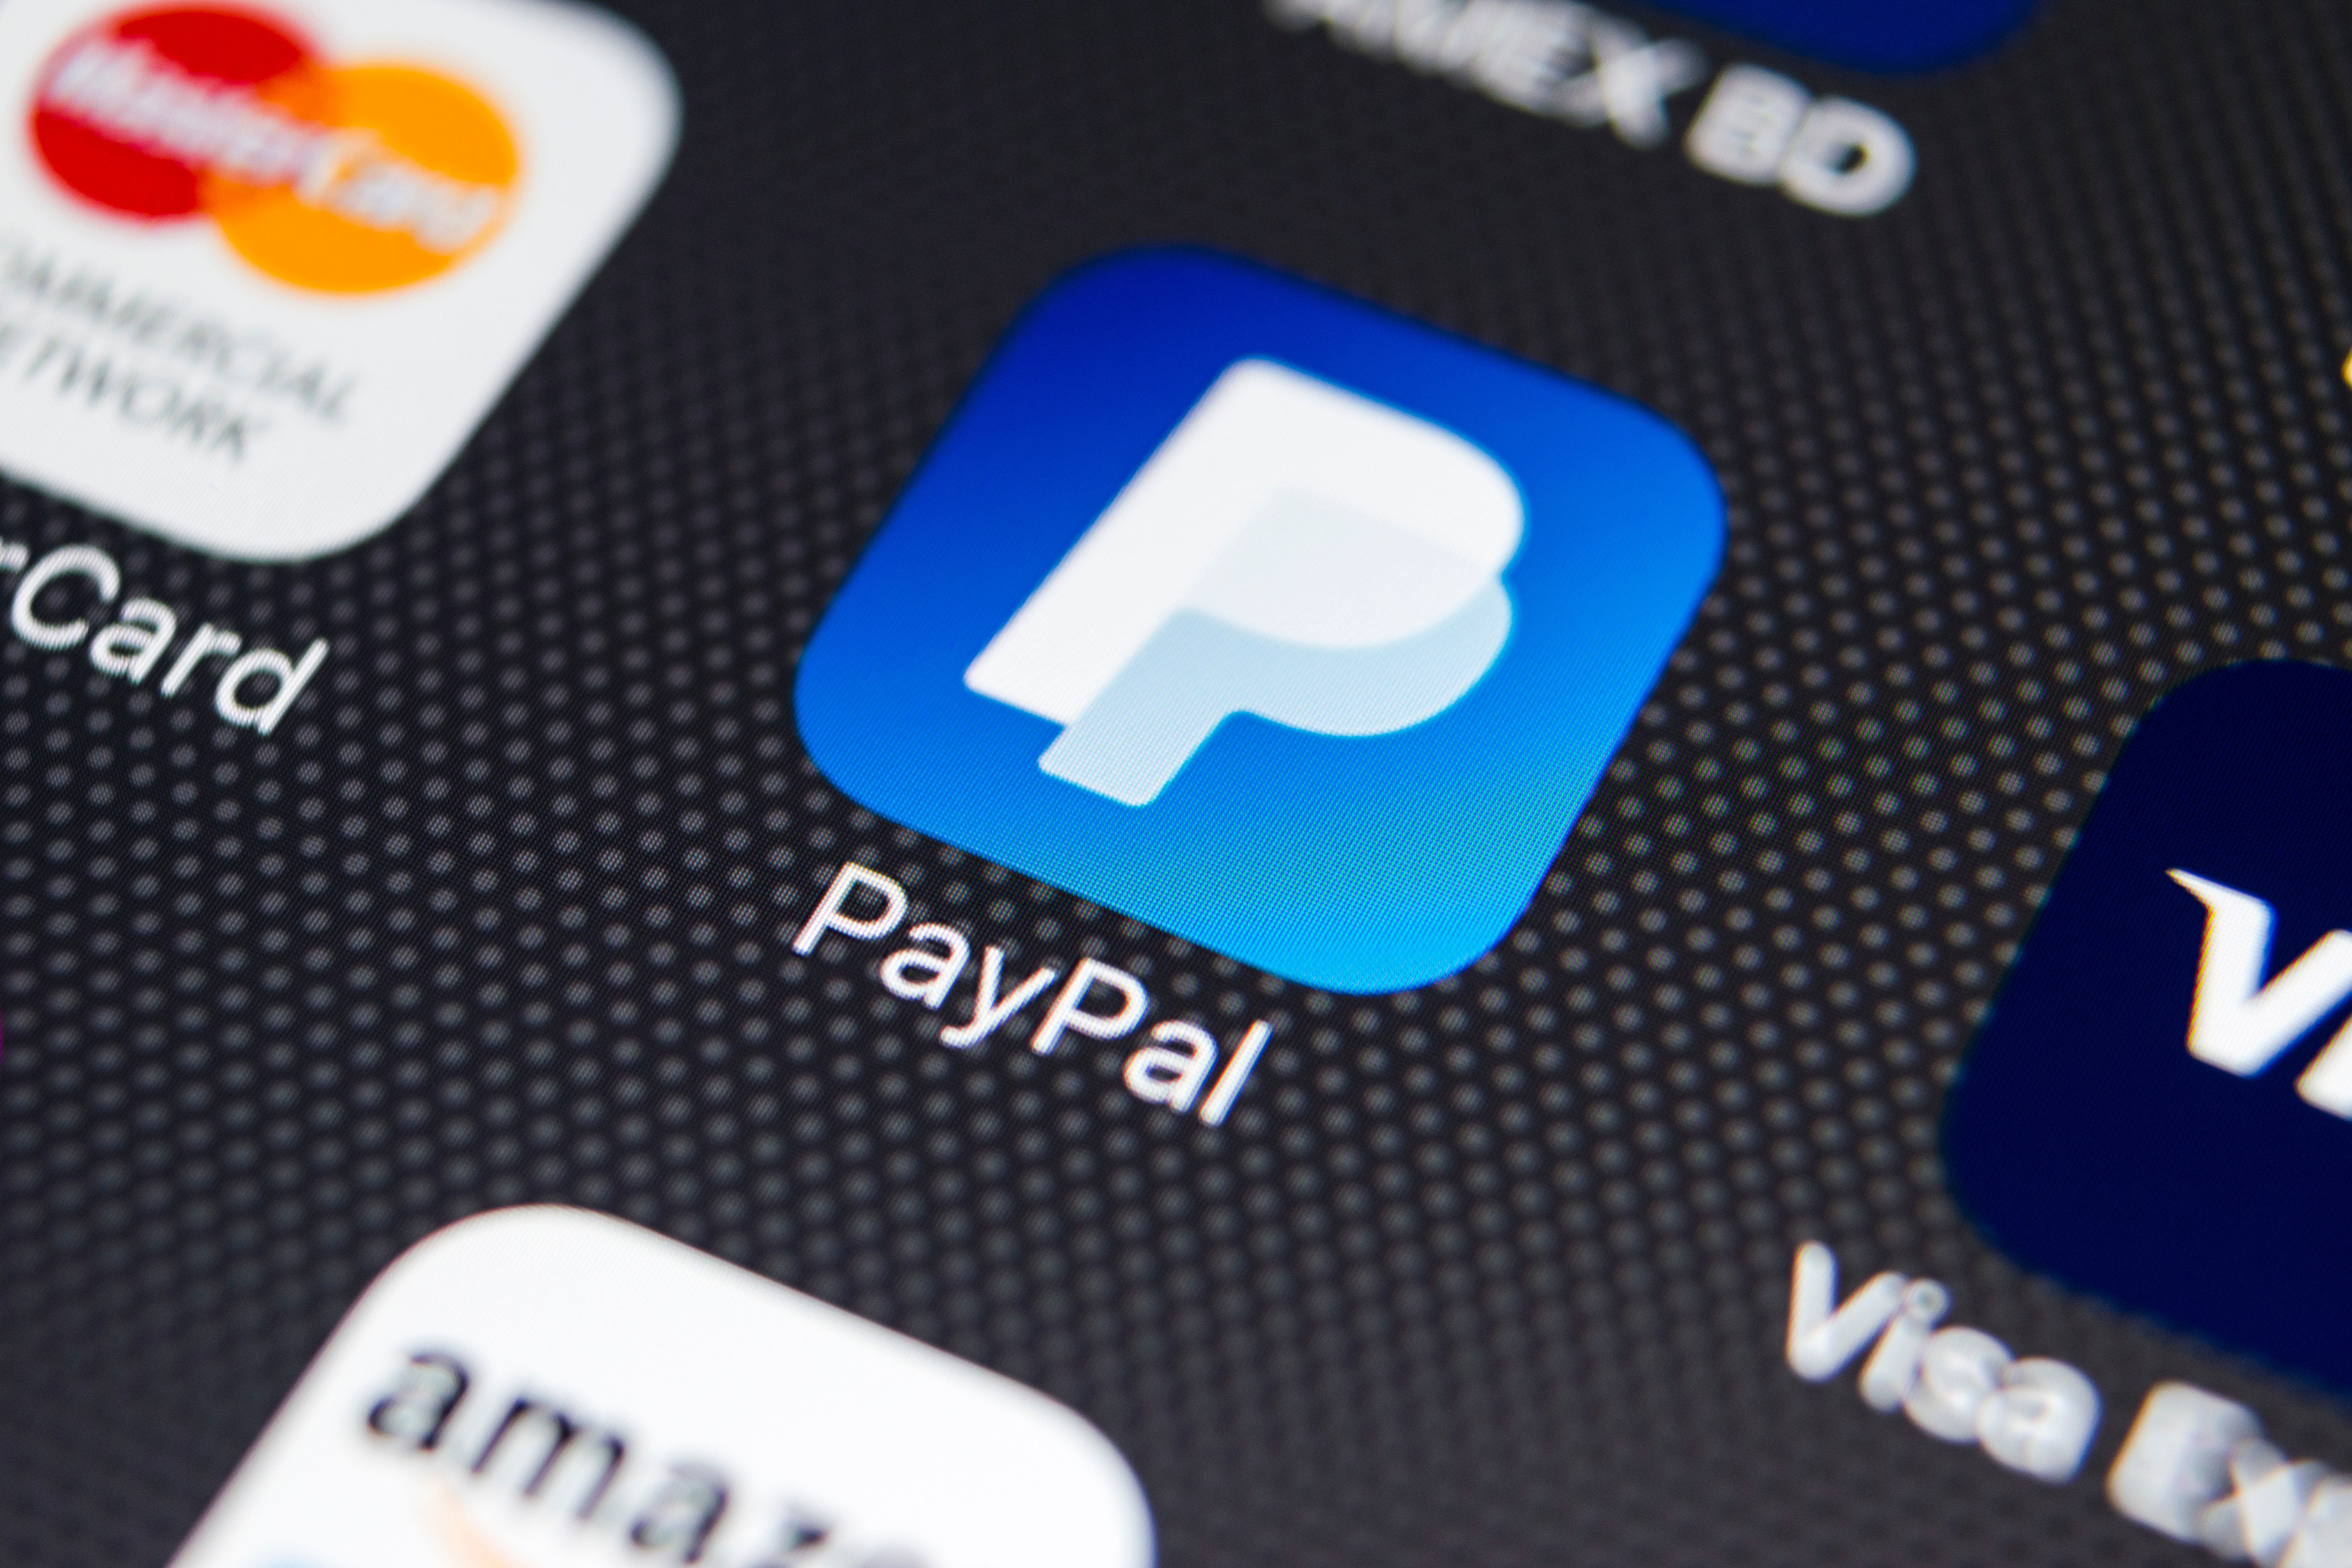 How Will PayPal Trade After Q2 Earnings? What The Stock Chart Says